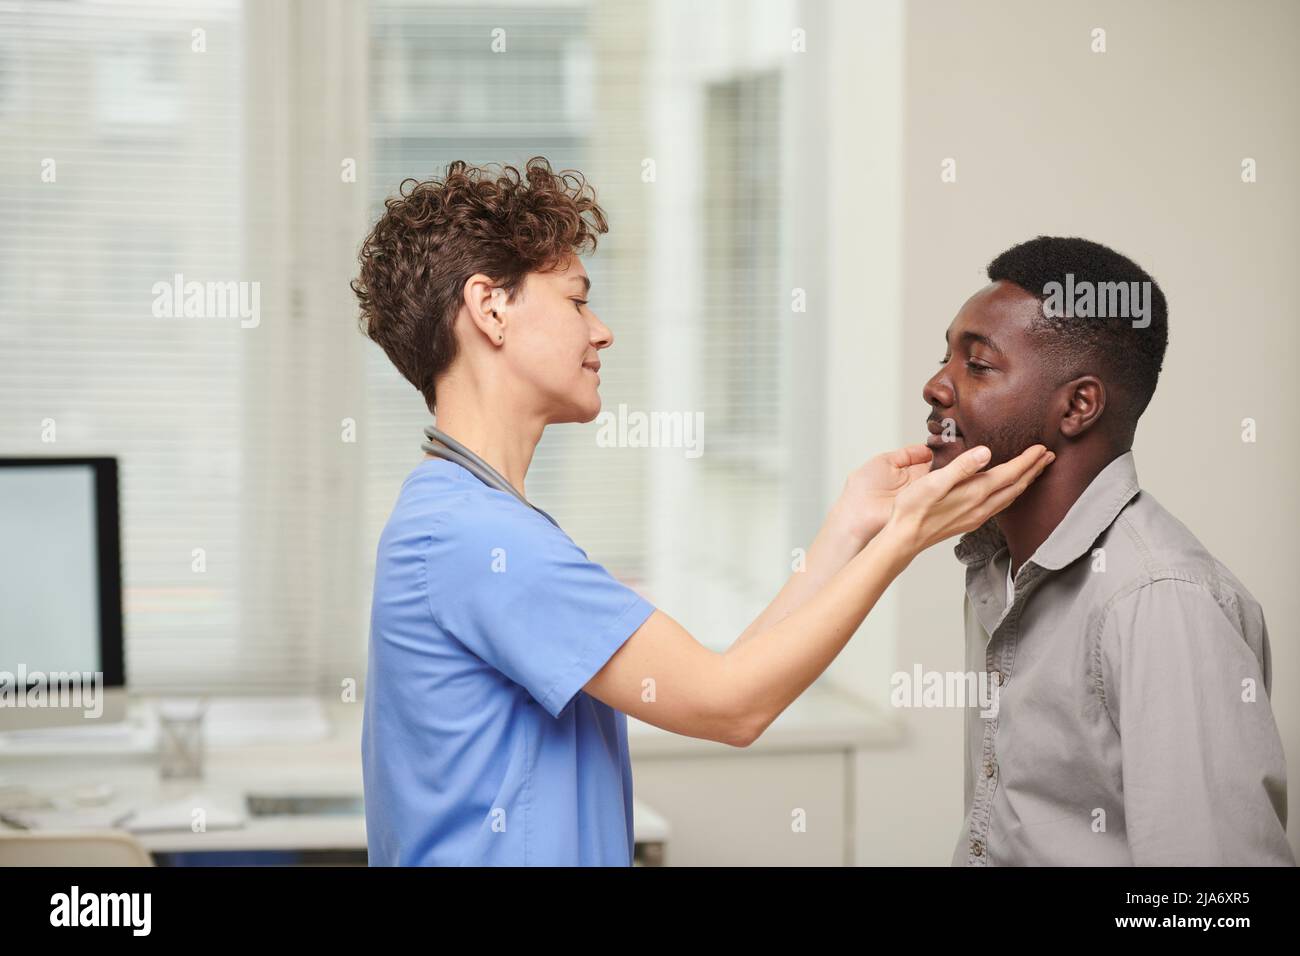 Horizontal side view shot of female doctor wearing blue uniform checking size of African American patients lymph glands Stock Photo